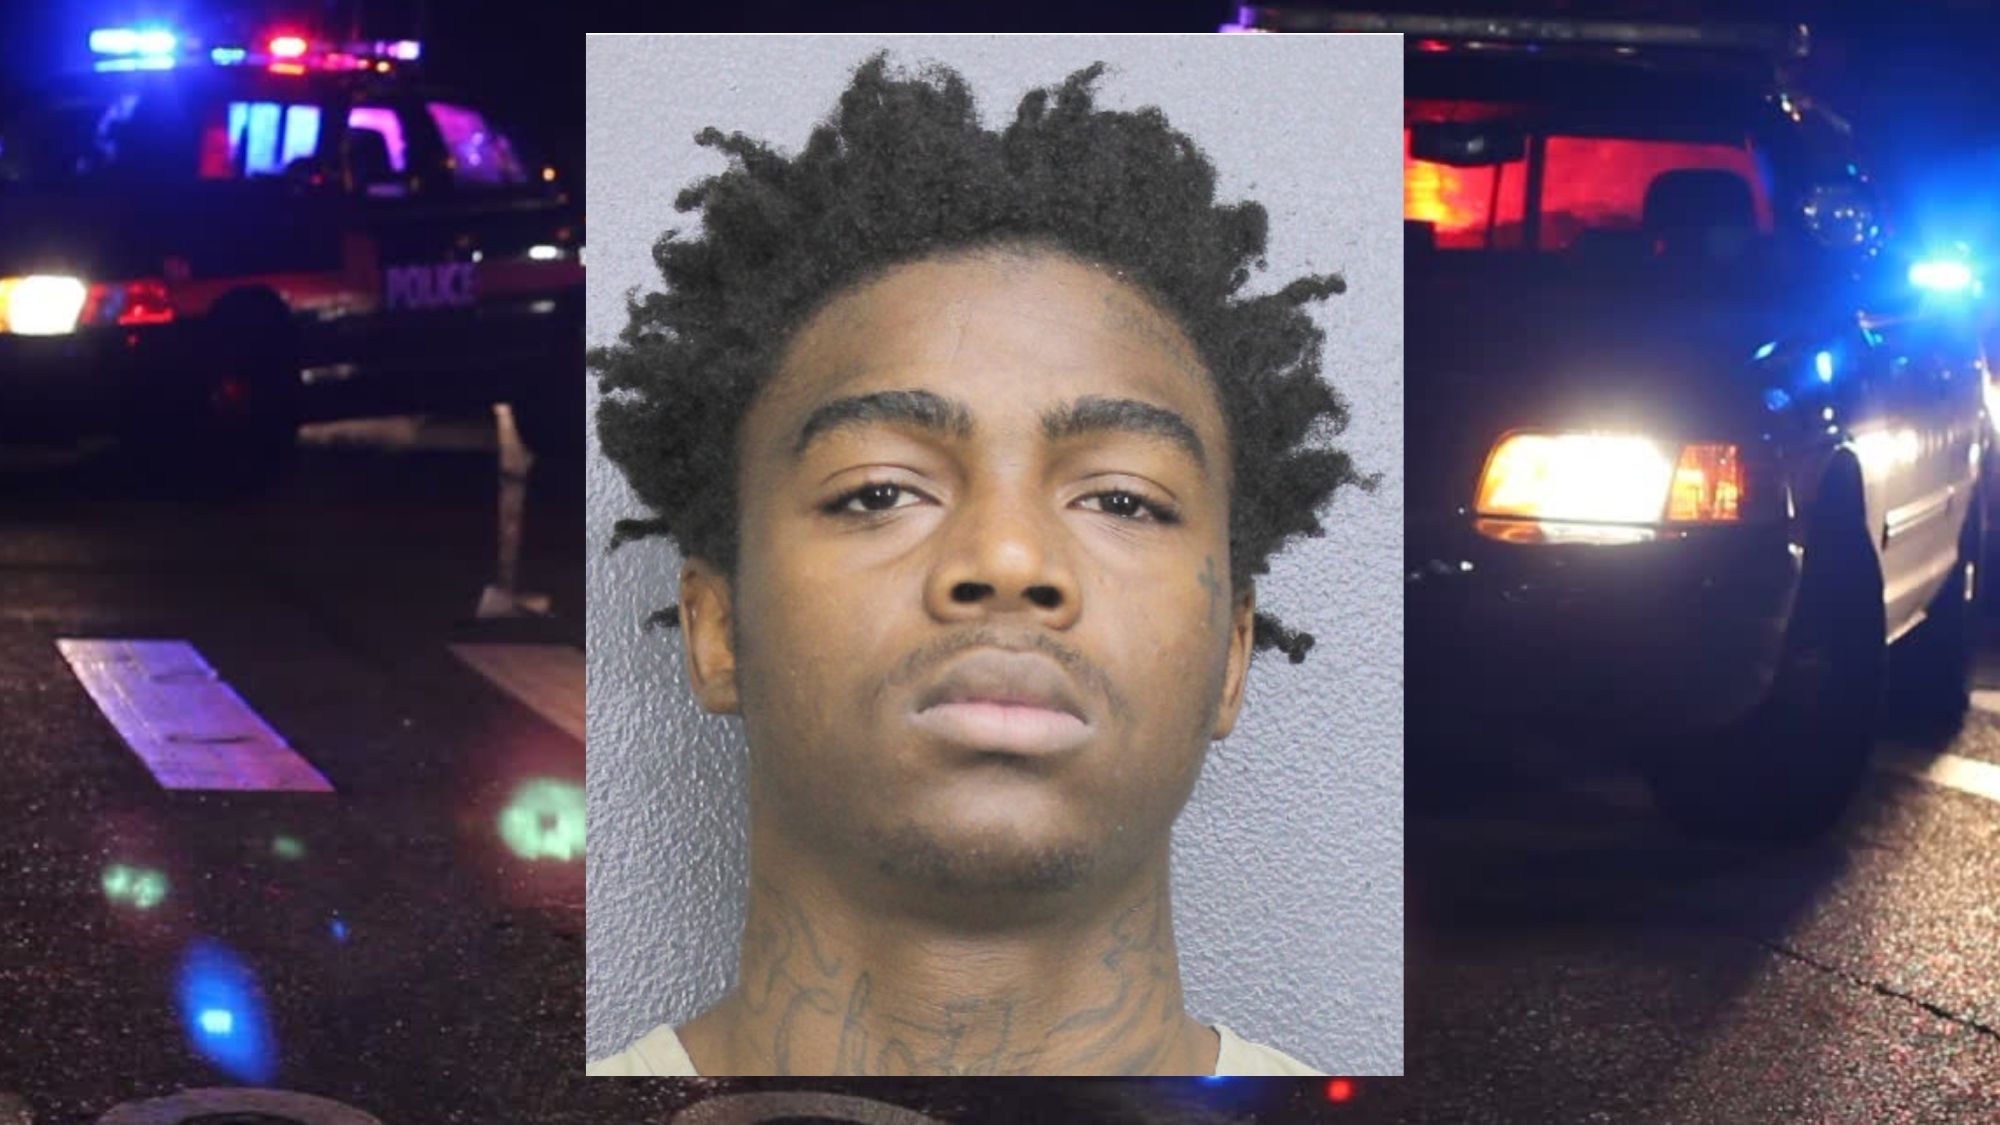 Man Arrested For Armed Kidnapping of Taxi Driver in North Lauderdale